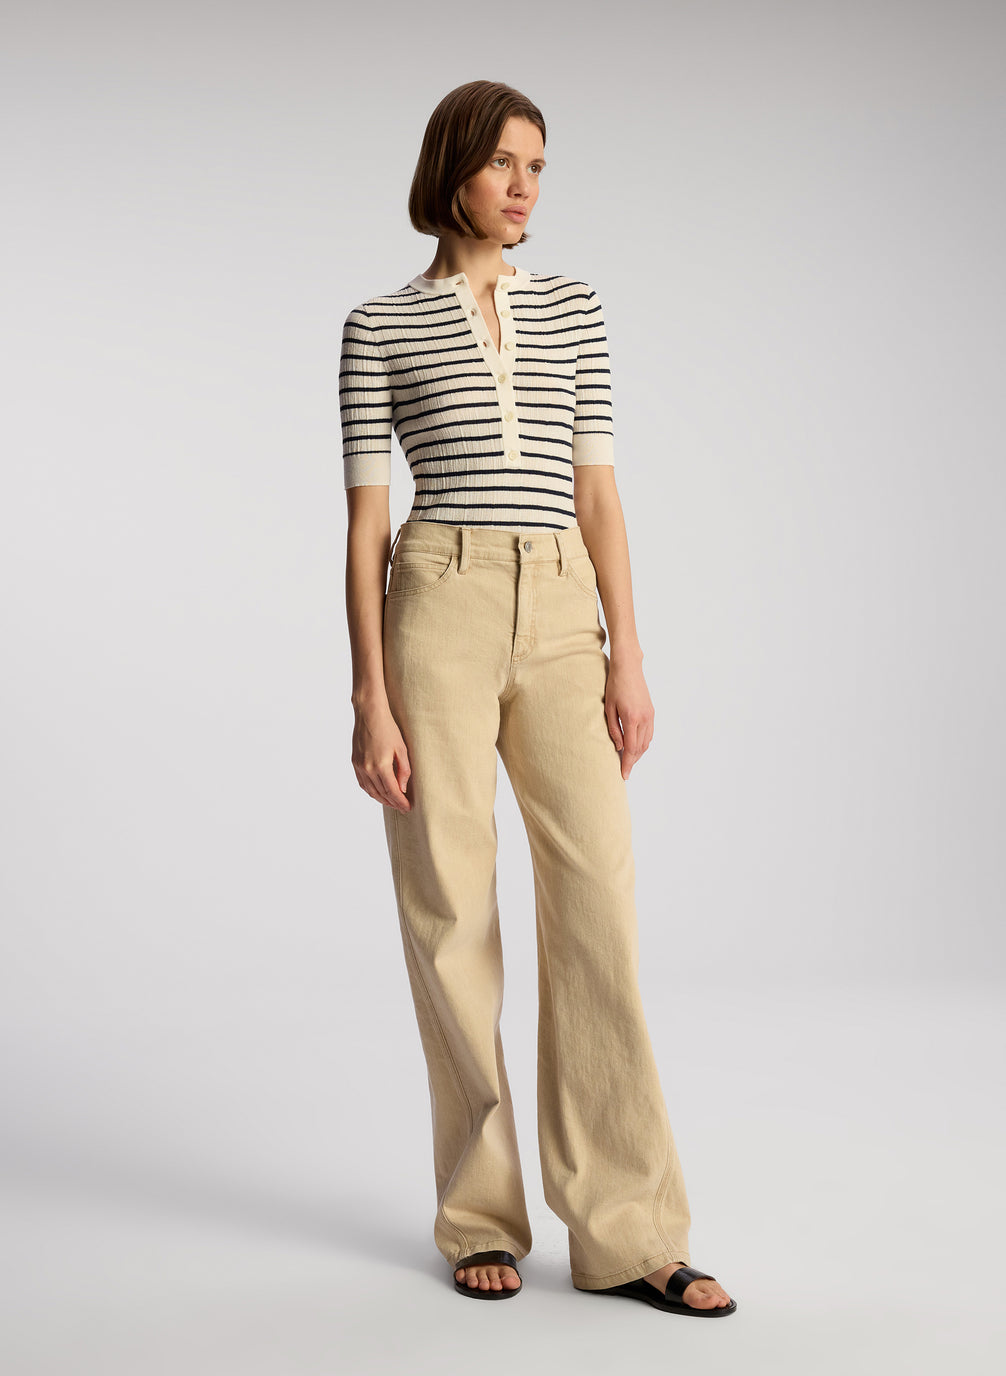 view of woman wearing navy blue and white striped shirt and tan pants